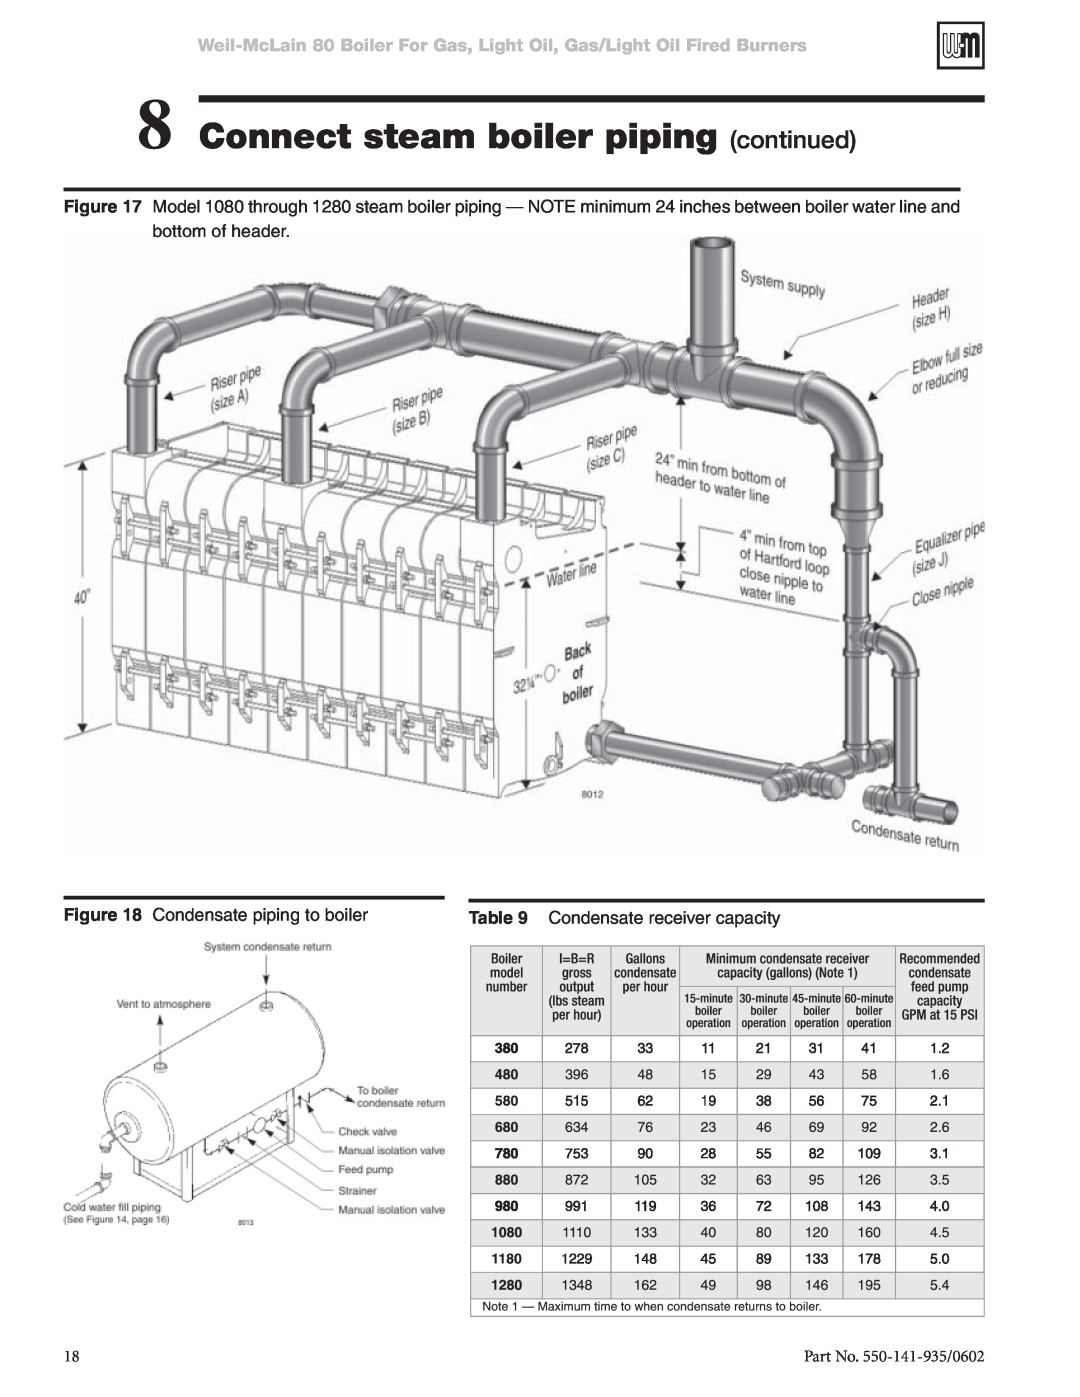 Weil-McLain 80 manual Connect steam boiler piping continued, Condensate piping to boiler, Condensate receiver capacity 